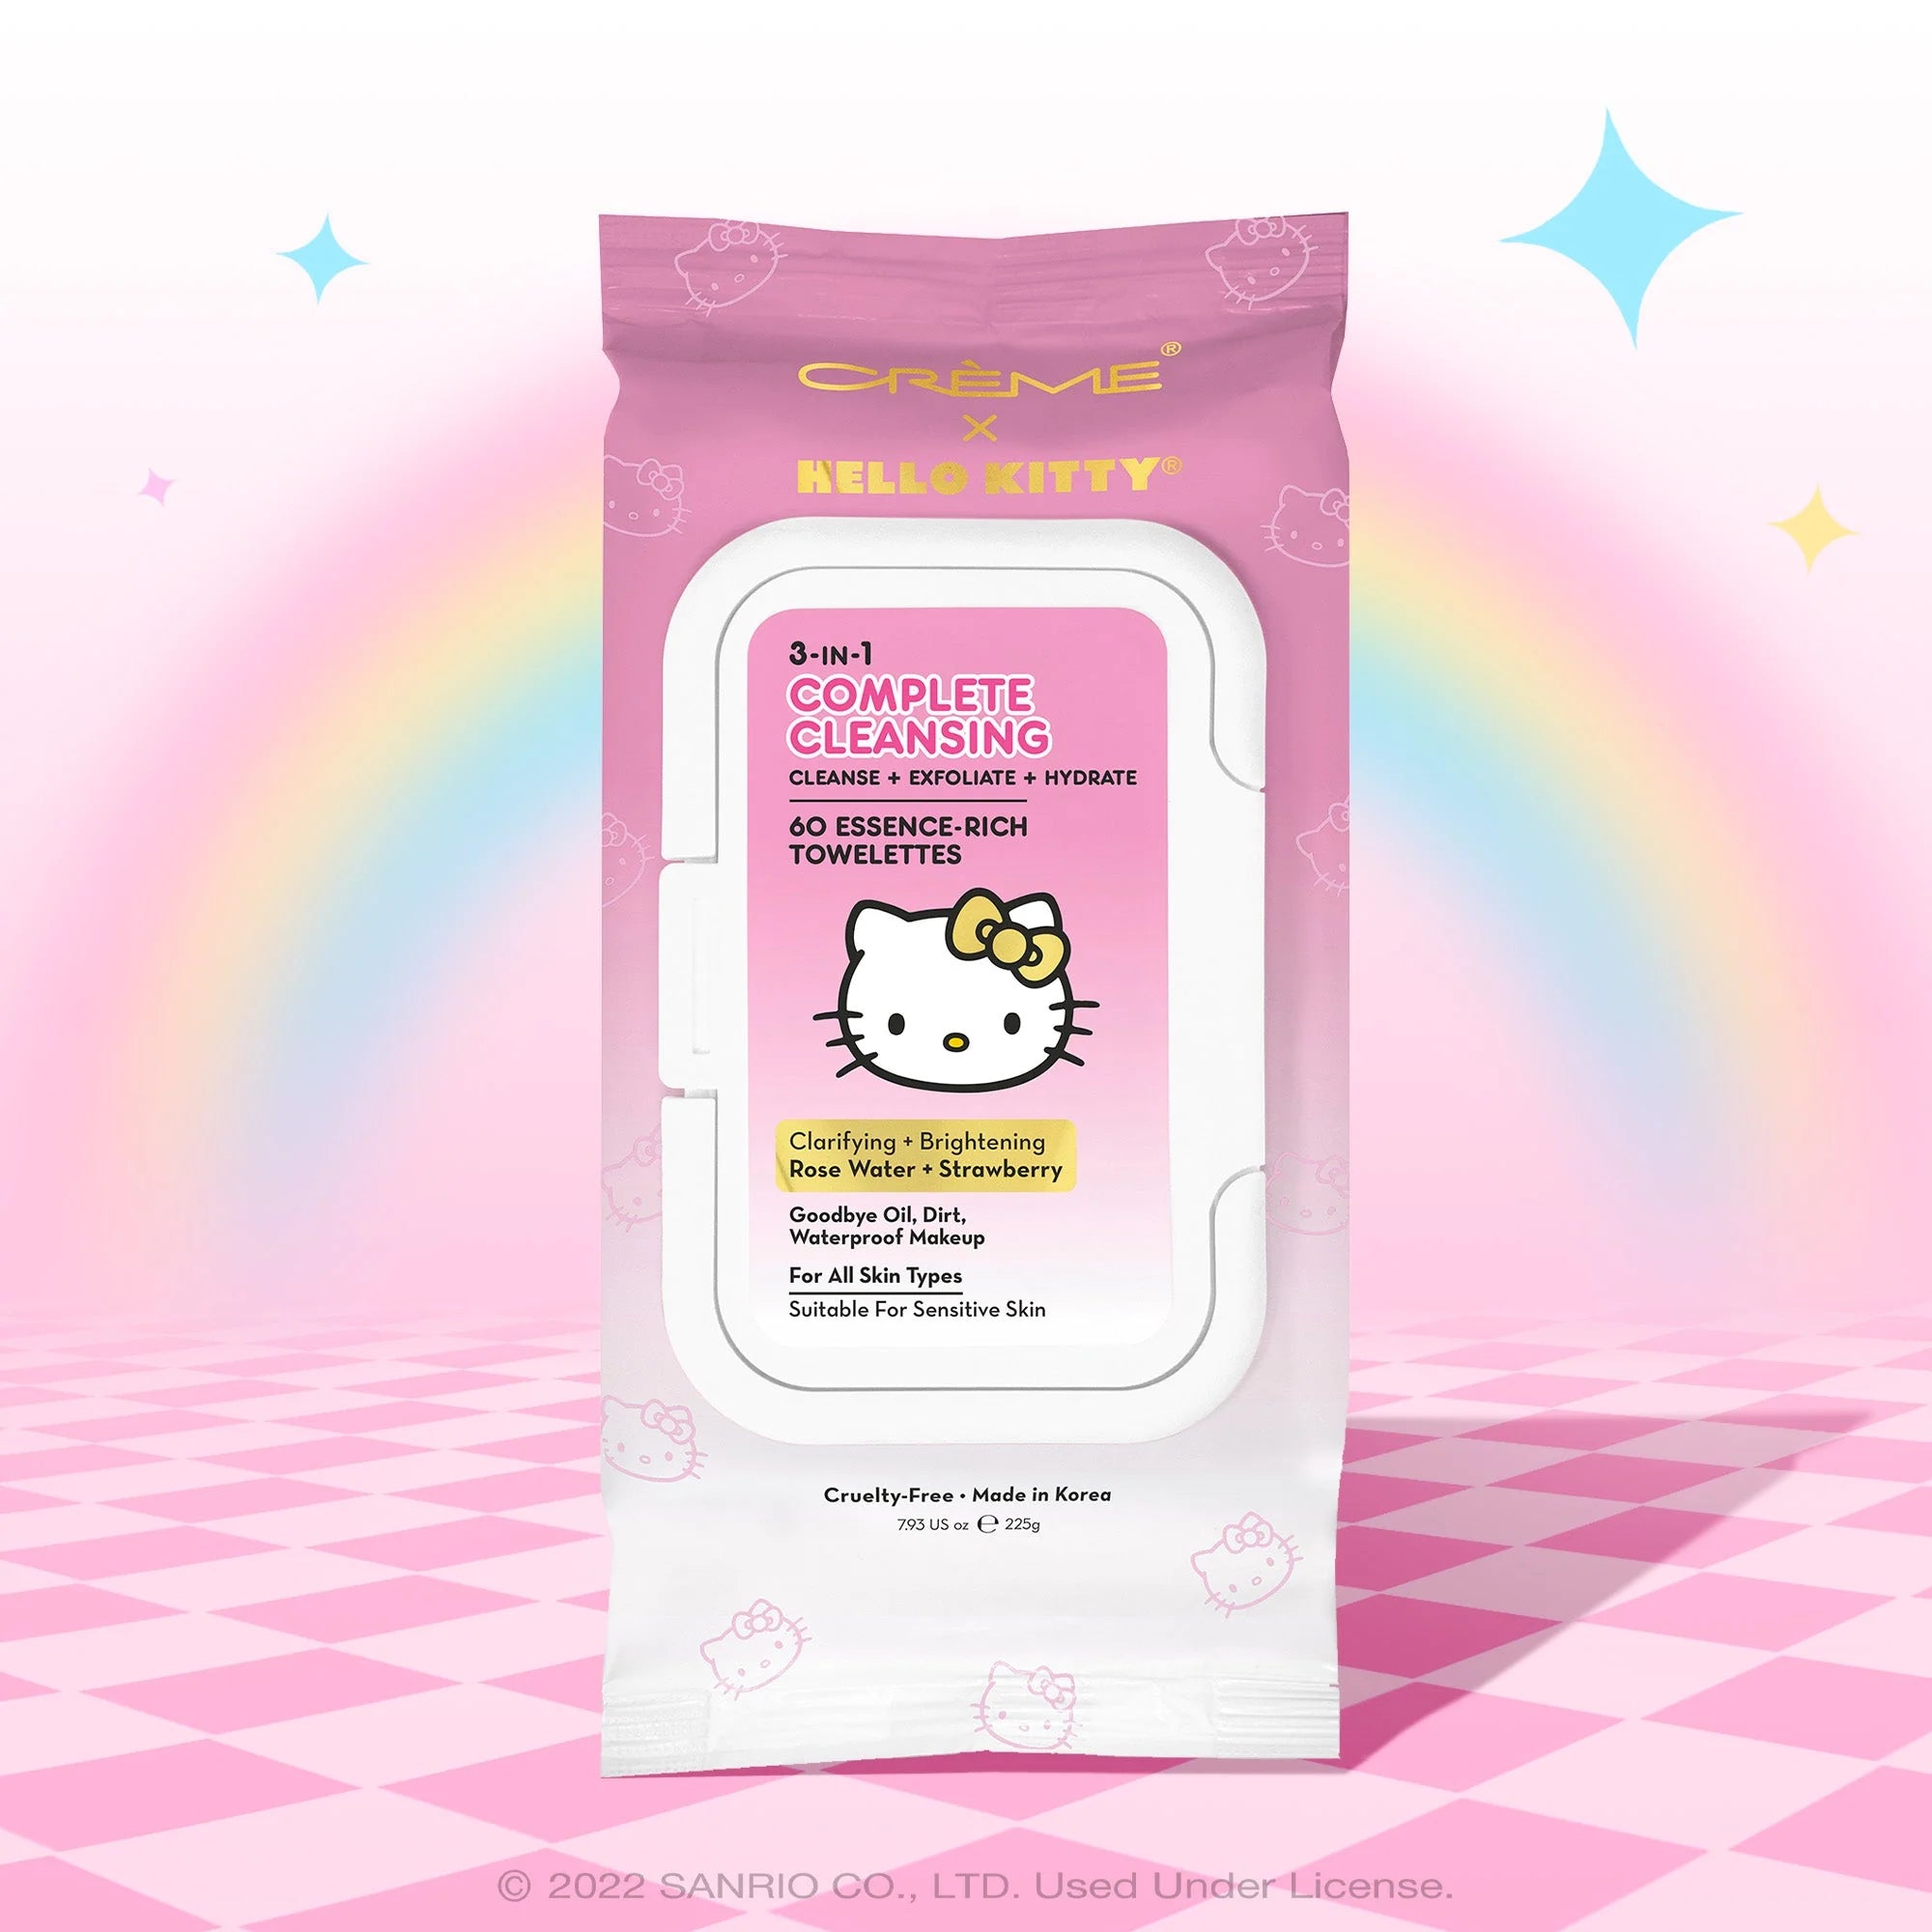 The Crème- HK 3-in-1 complete cleansing towelettes